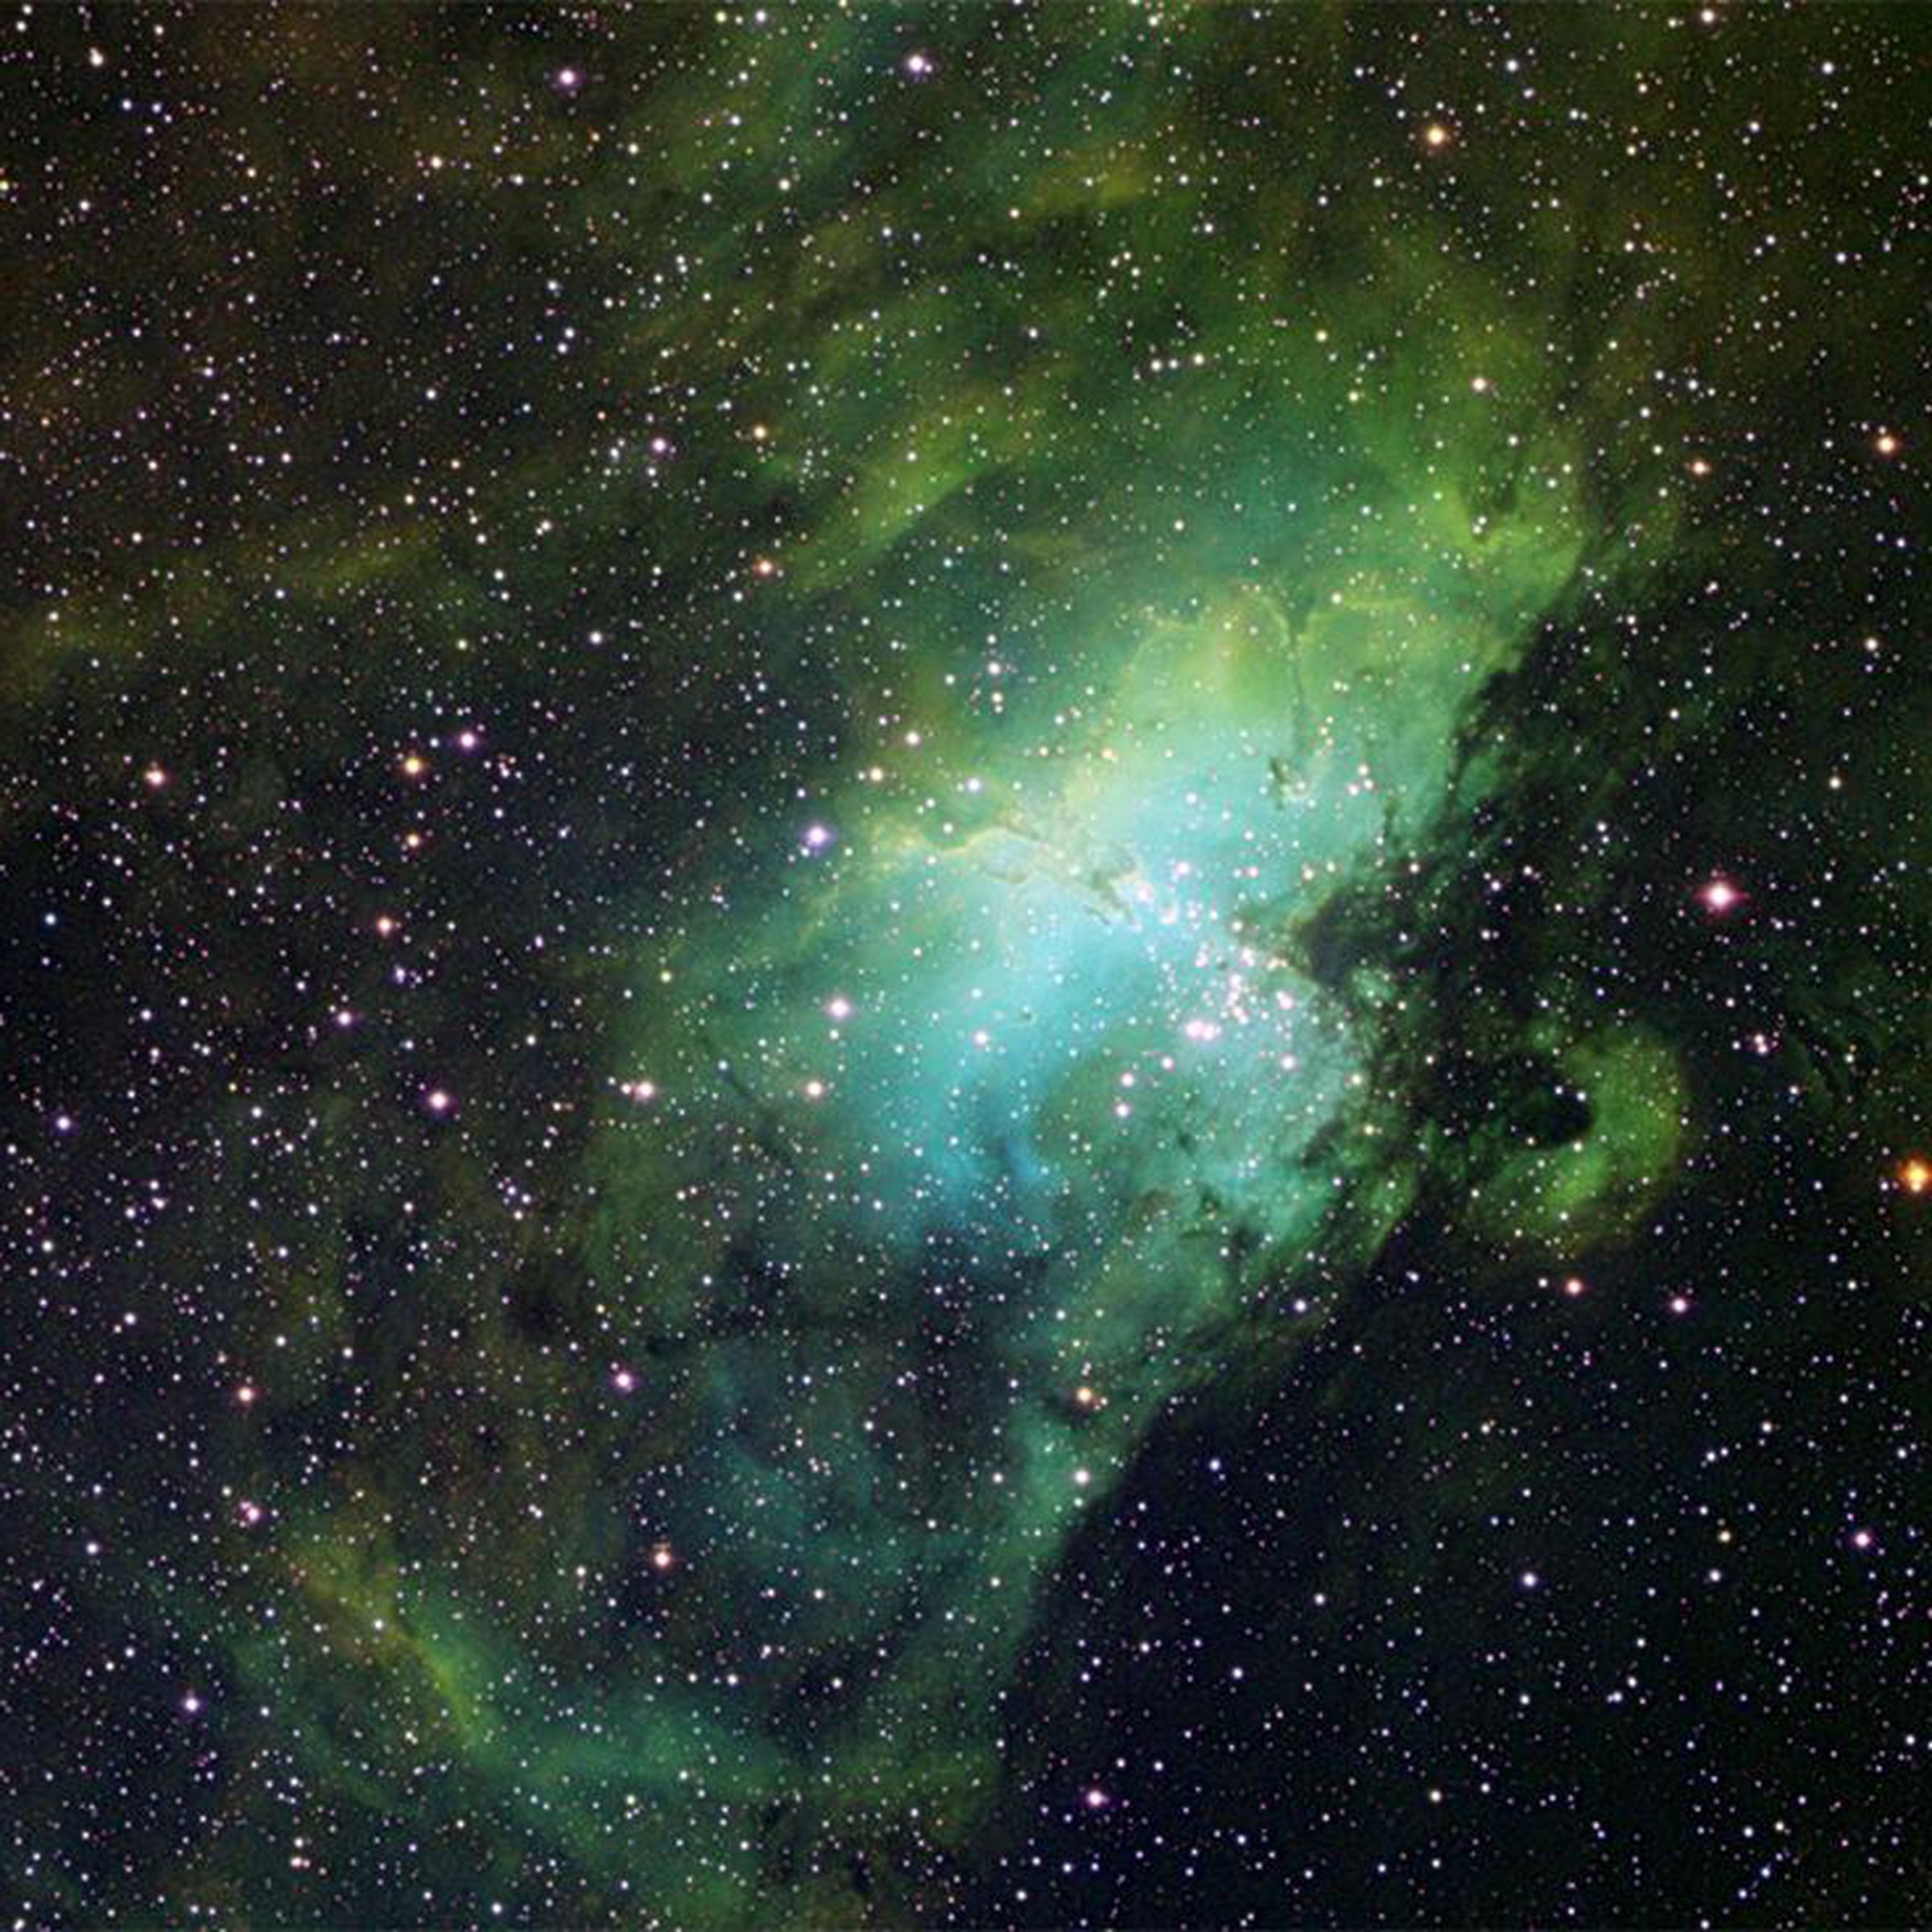 A greenish version of an astrophotography picture